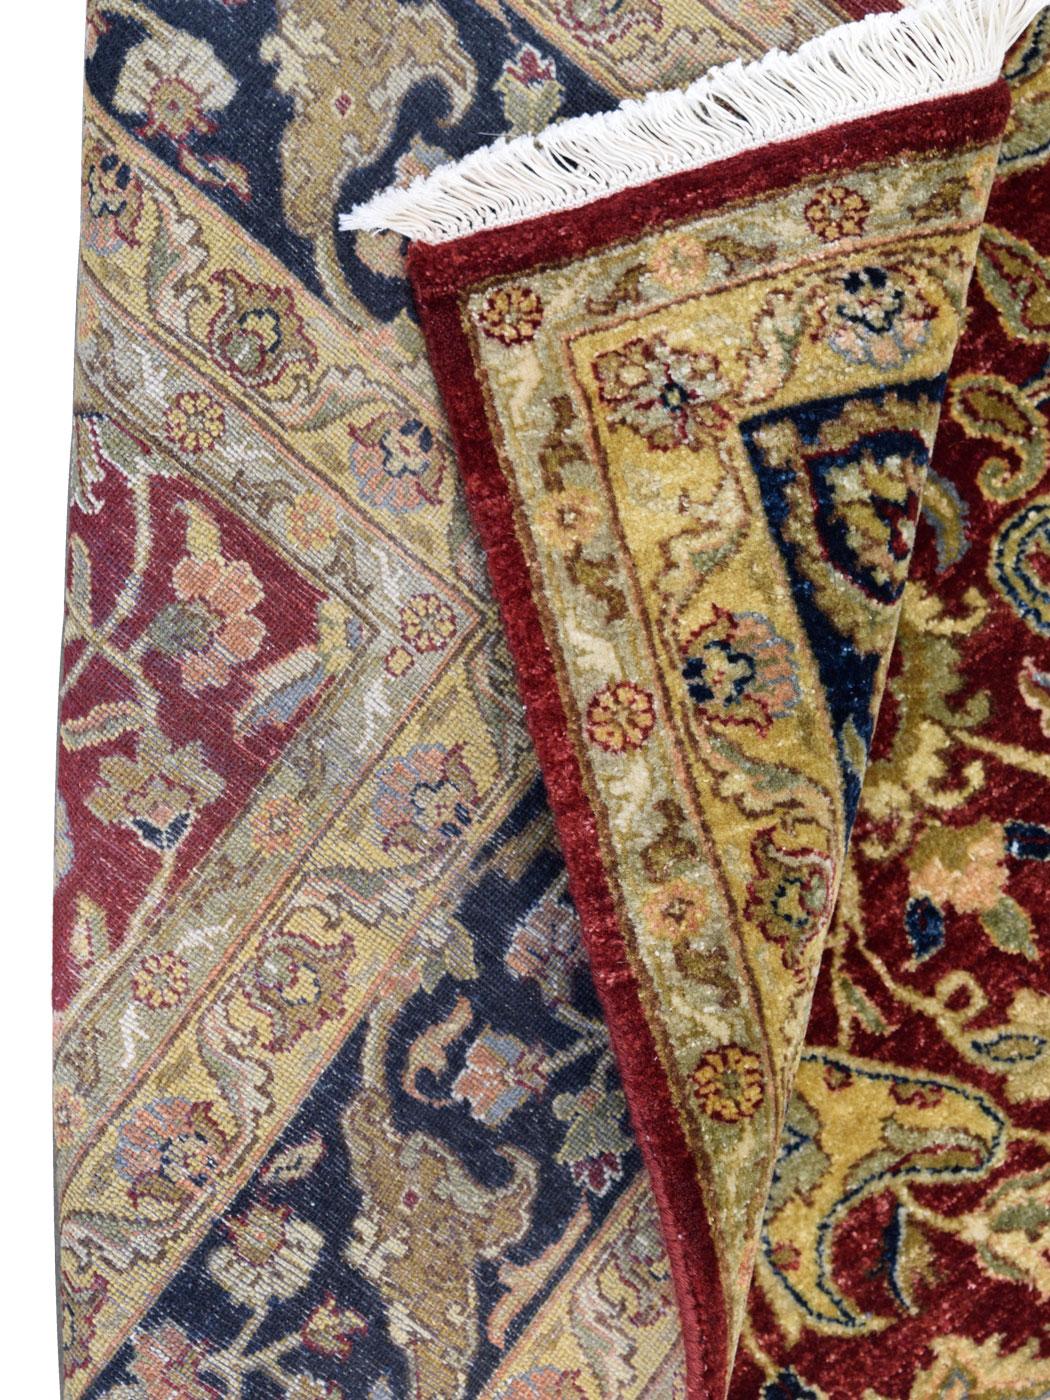 Romantic Red, Taupe, and Indigo Hand Knotted Wool Lavar Carpet, 6' x 9' For Sale 1